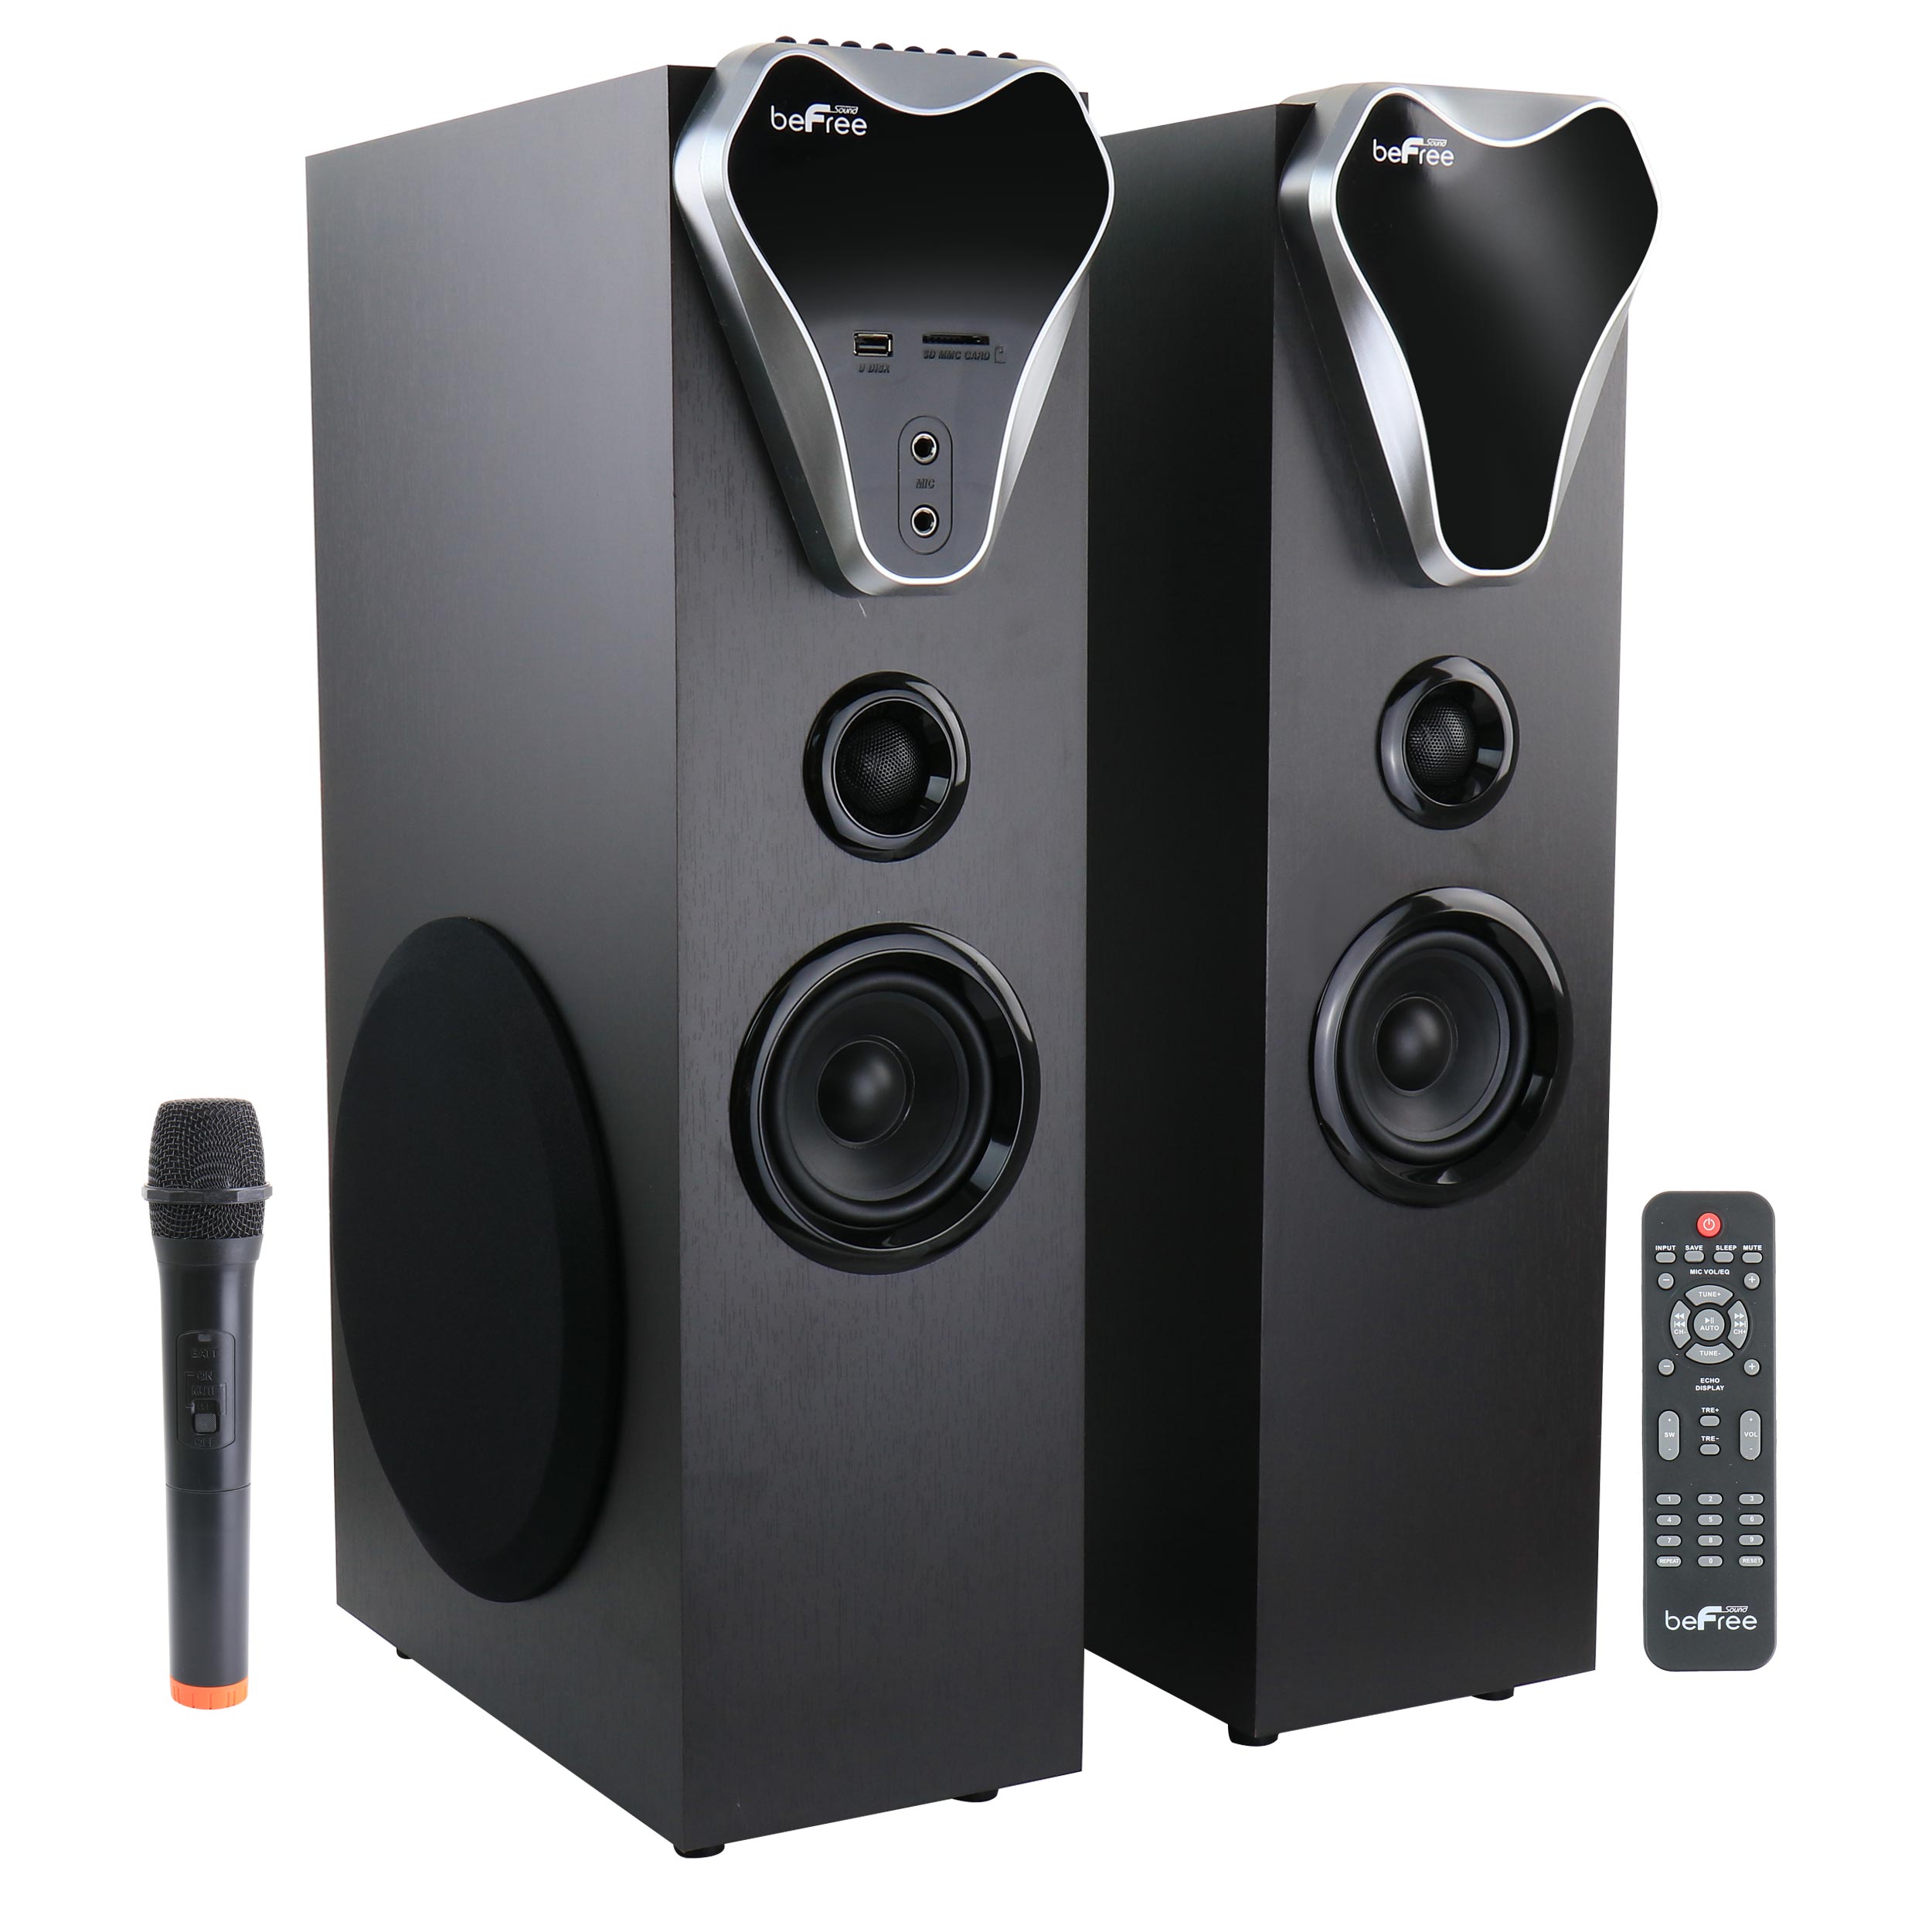 BFS-800 , beFree Sound 2.1 Channel Bluetooth Tower Speakers with Optical  Input